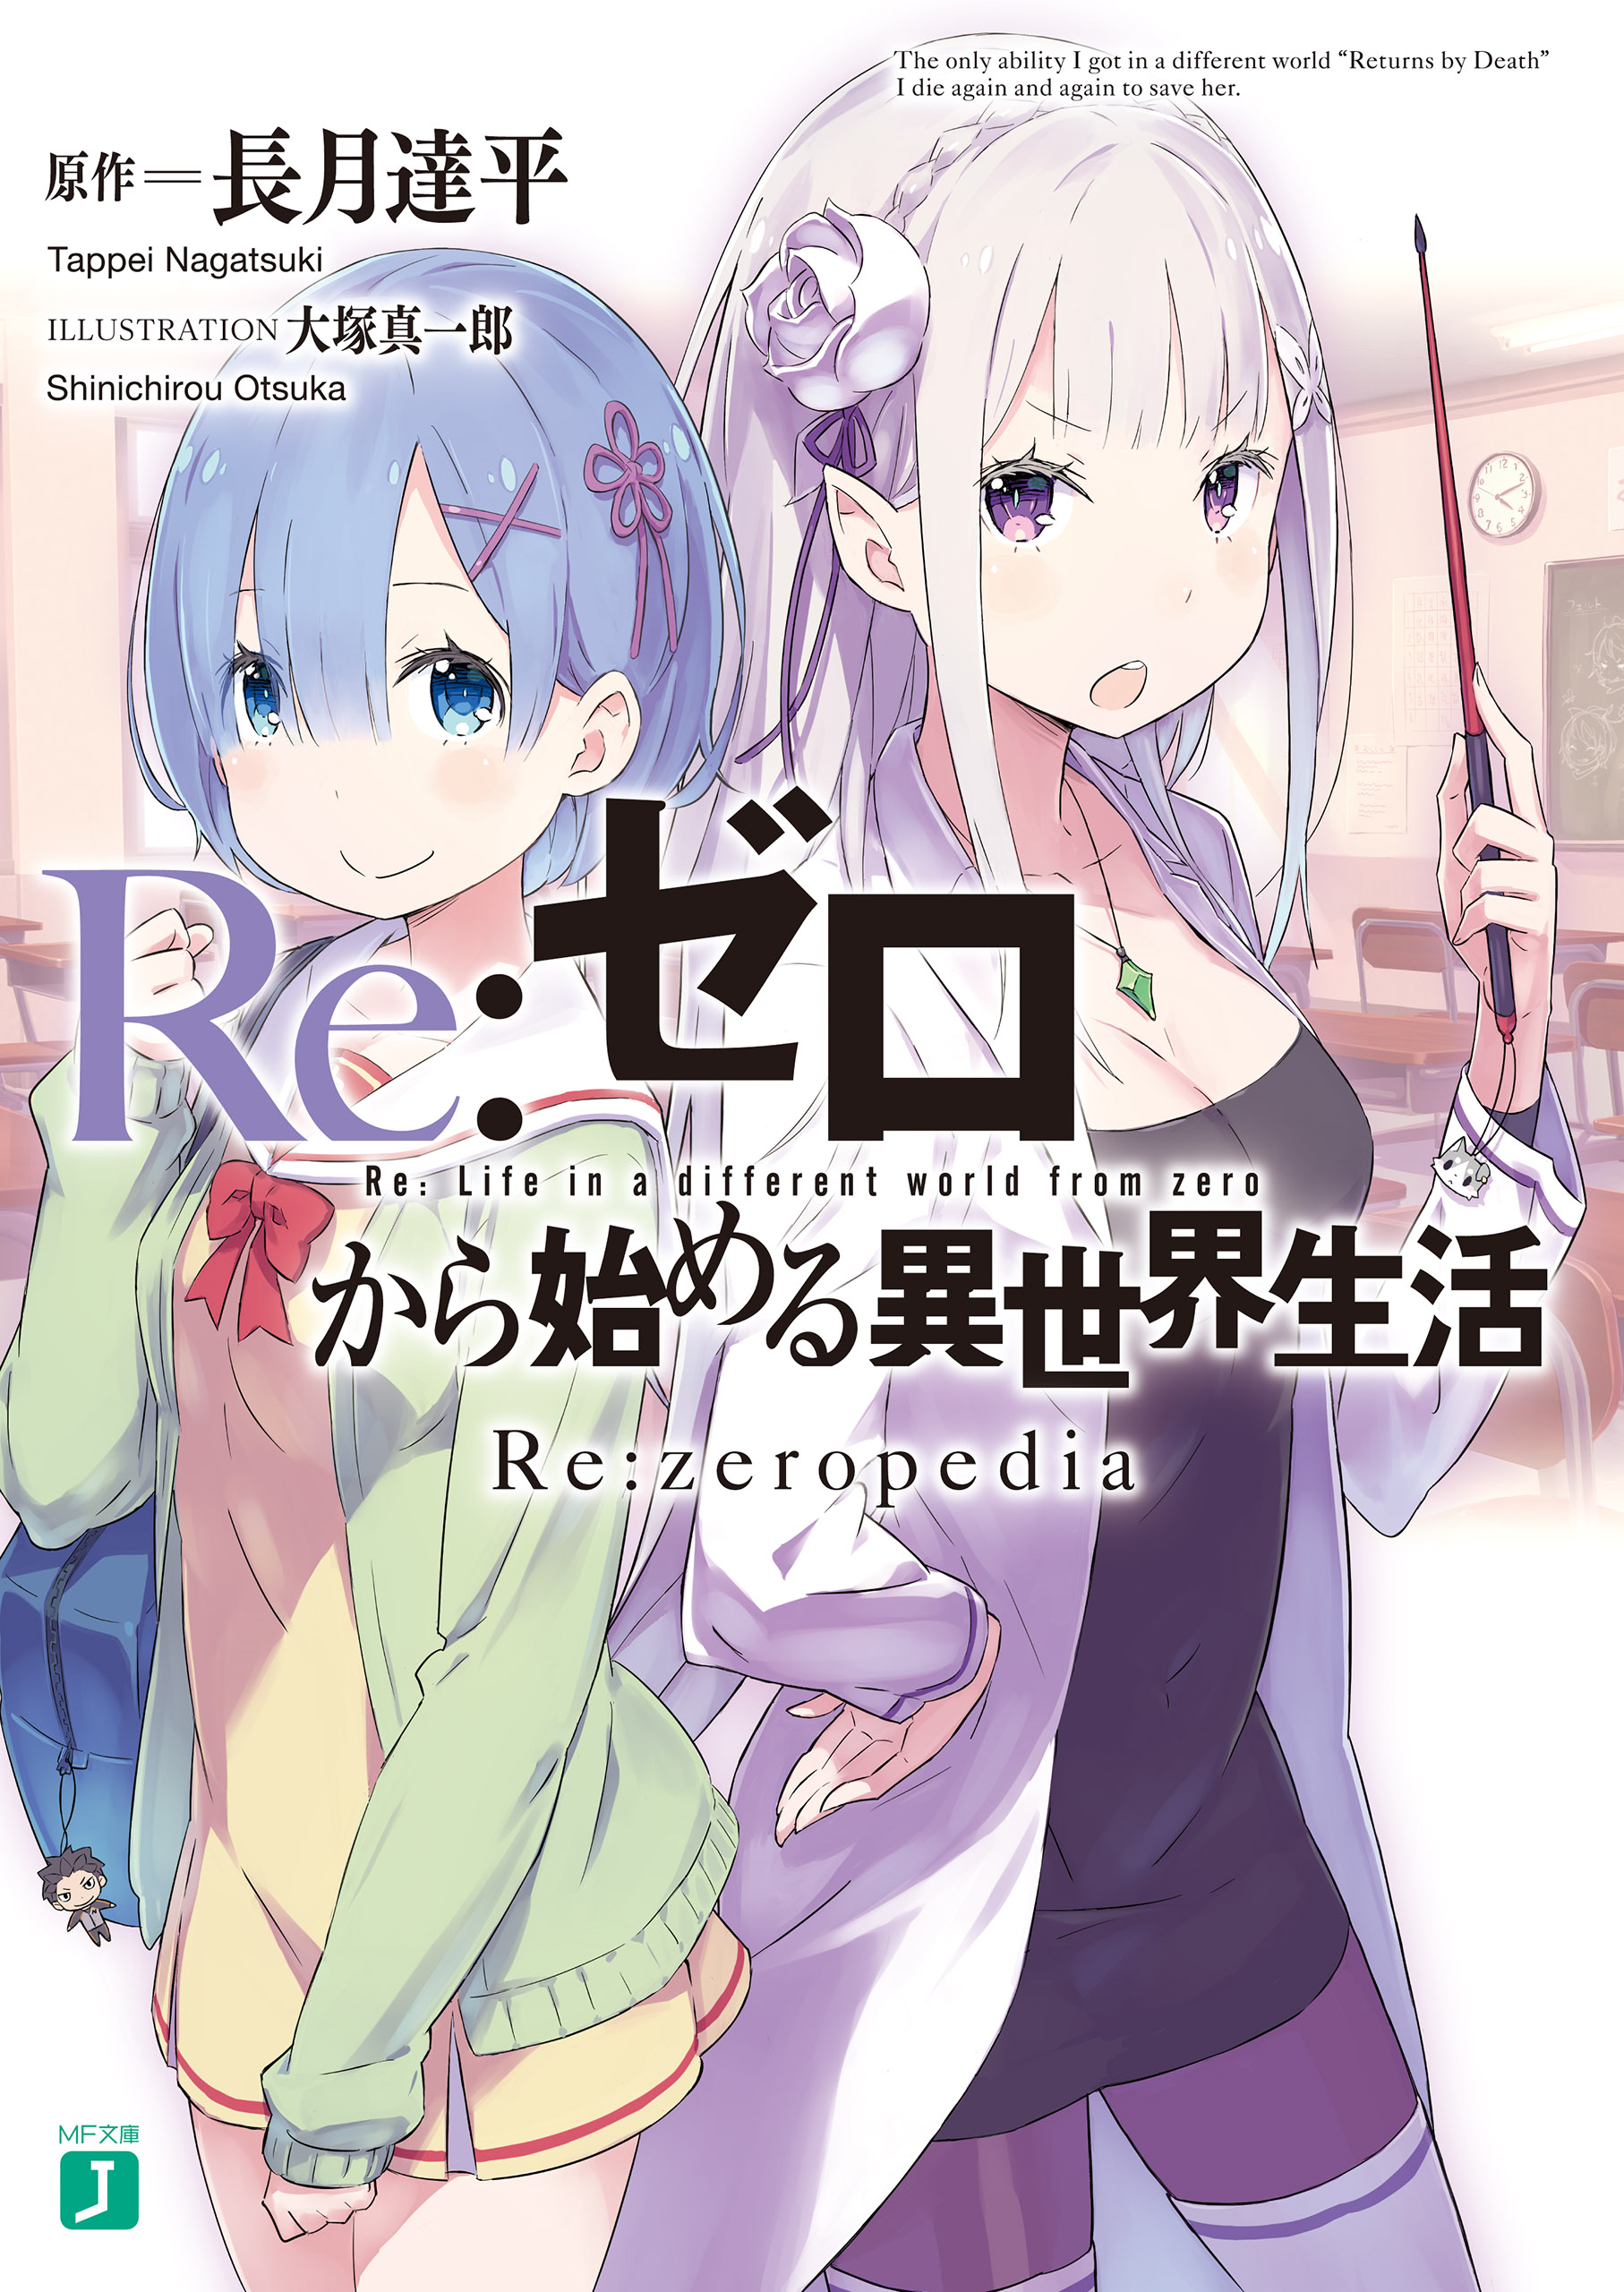 Media] Never realized that the images in the Re:Zero light novels were so  detailed. This was fun to color! : r/Re_Zero